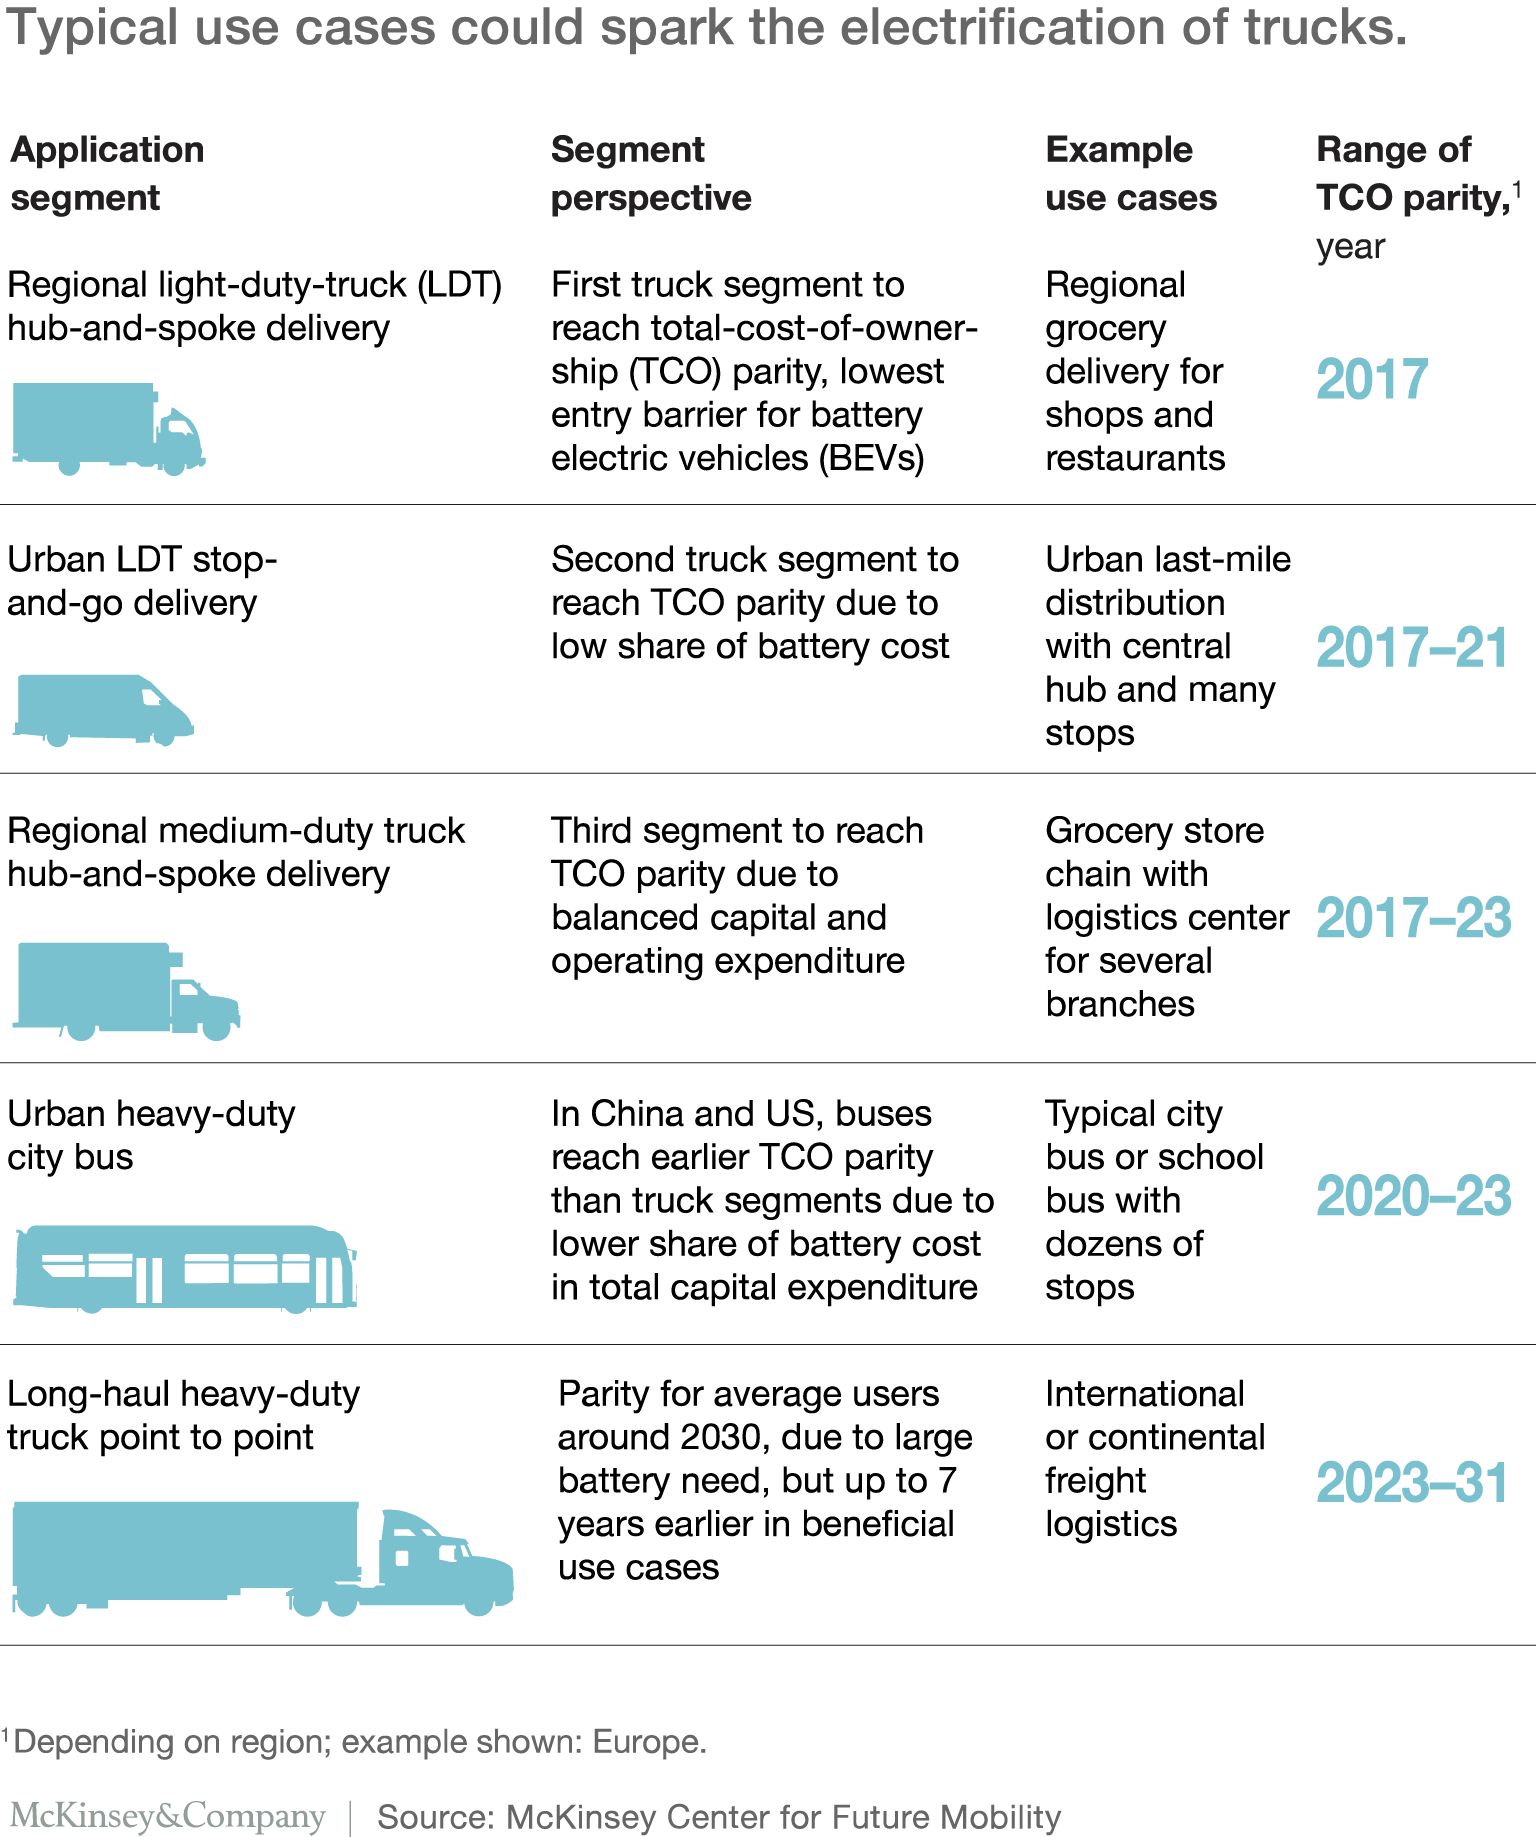 five use cases that will promote faster adoption of electric trucks: regional light-duty hub-and-spoke delivery, urban light-duty stop-and-go delivery, regional medium-duty hub-and-spoke delivery, heavy-duty city buses, and long-haul heavy-duty point-to-point routes